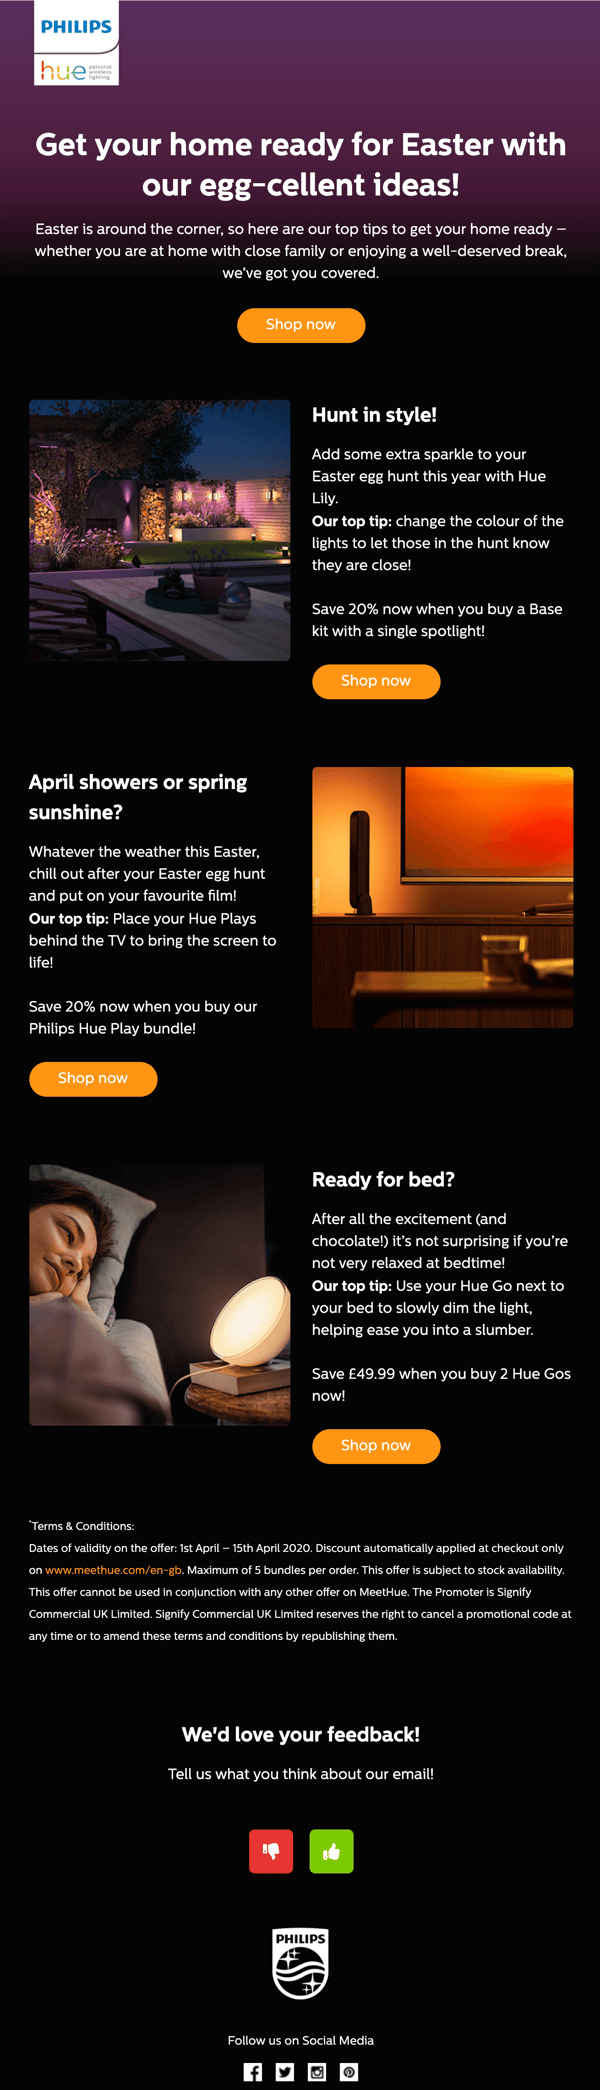 Philips-hue-easter-email